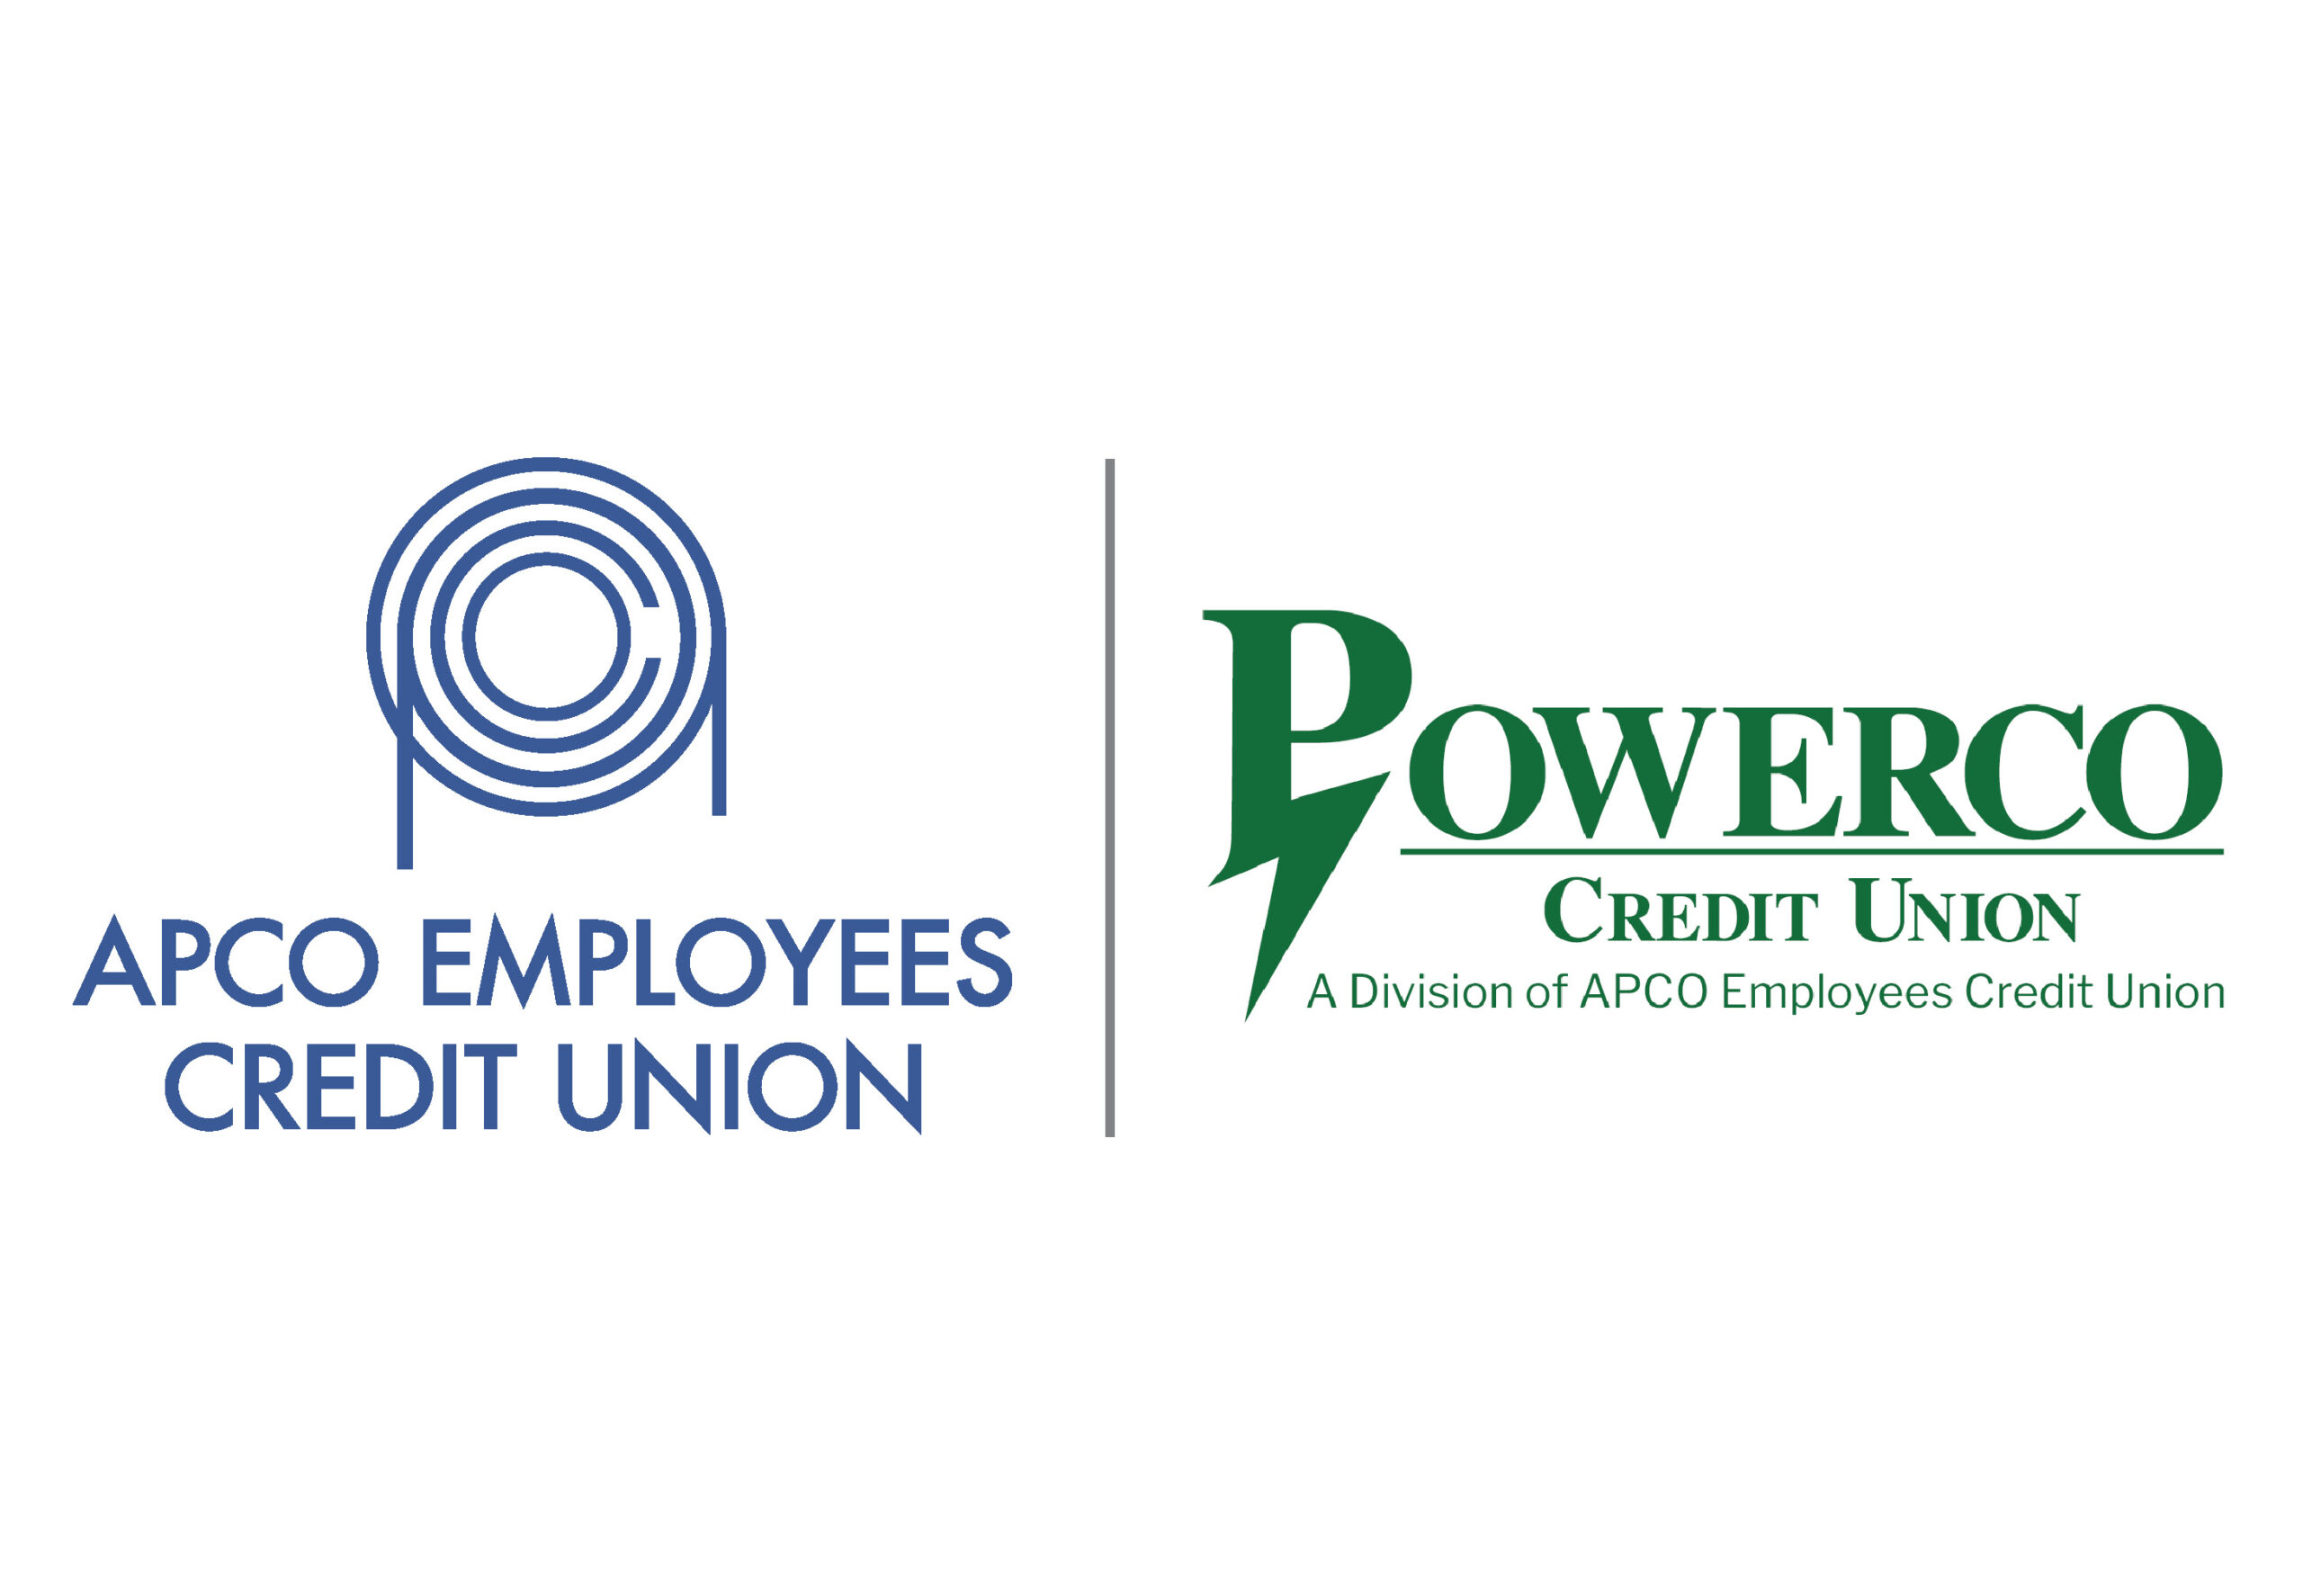 APCO Employees Credit Union Named Among Most Efficient Credit Unions in America